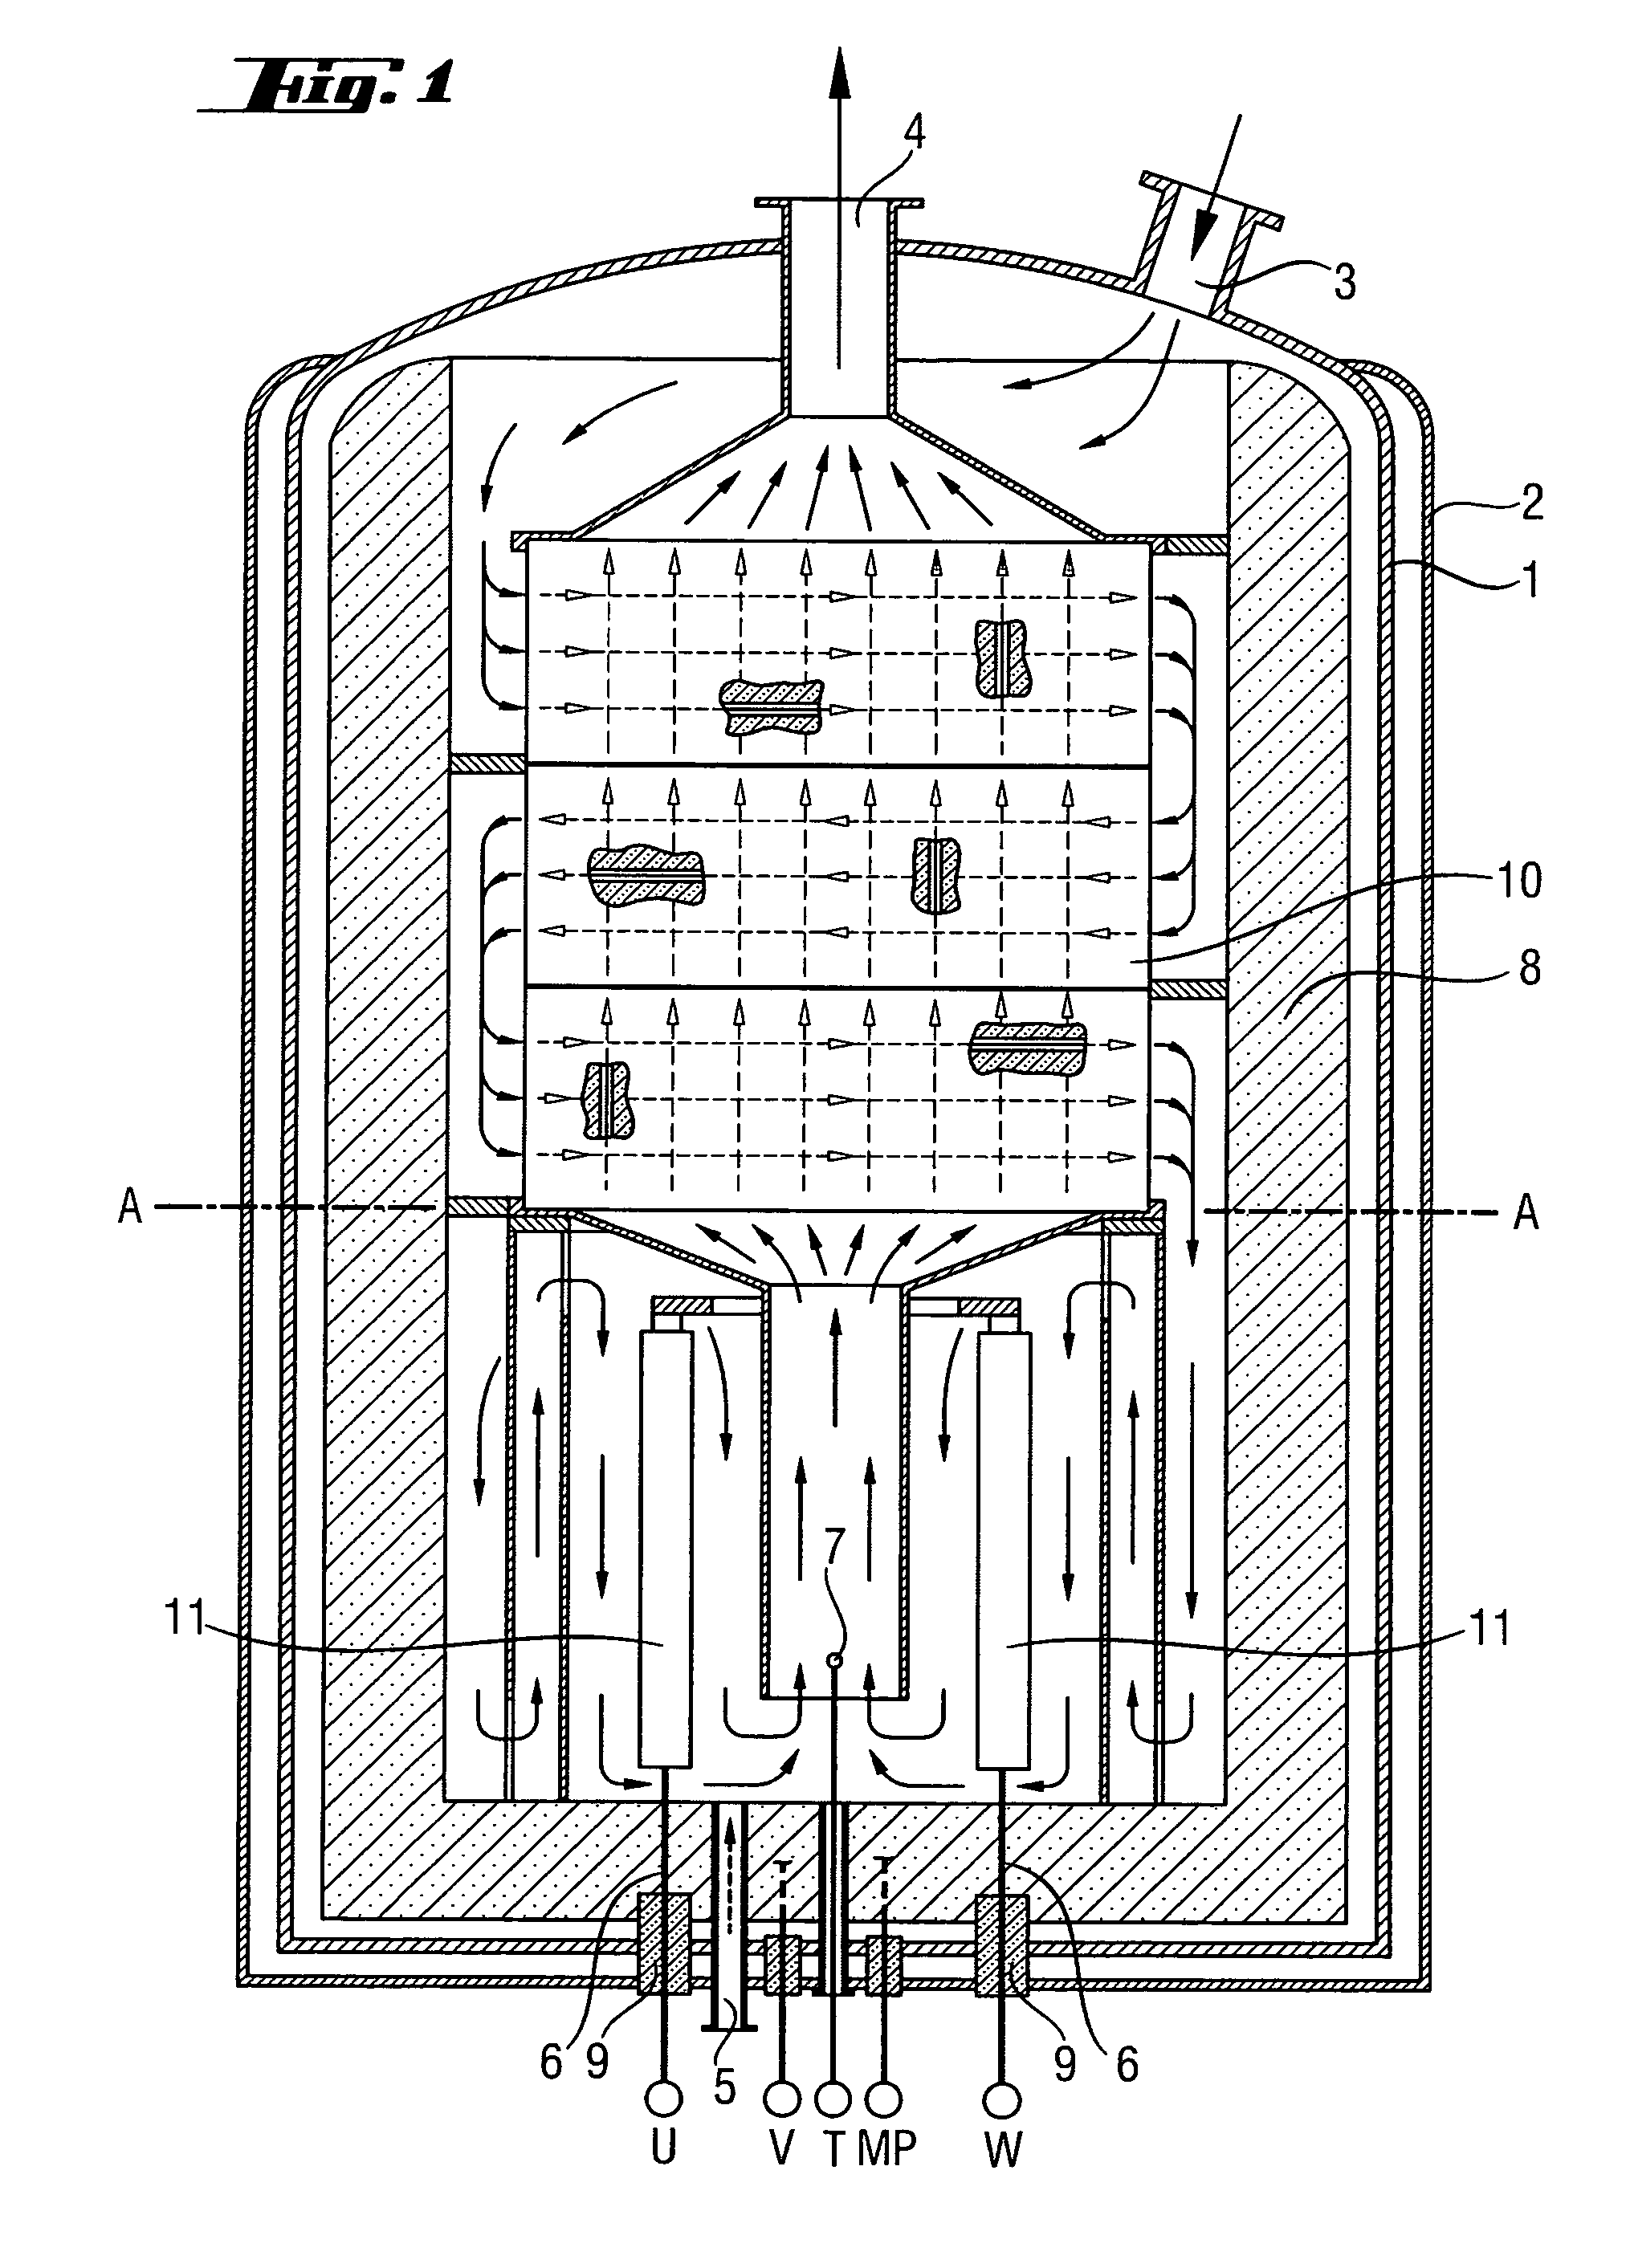 Process and apparatus for the hydrogenation of chlorosilanes